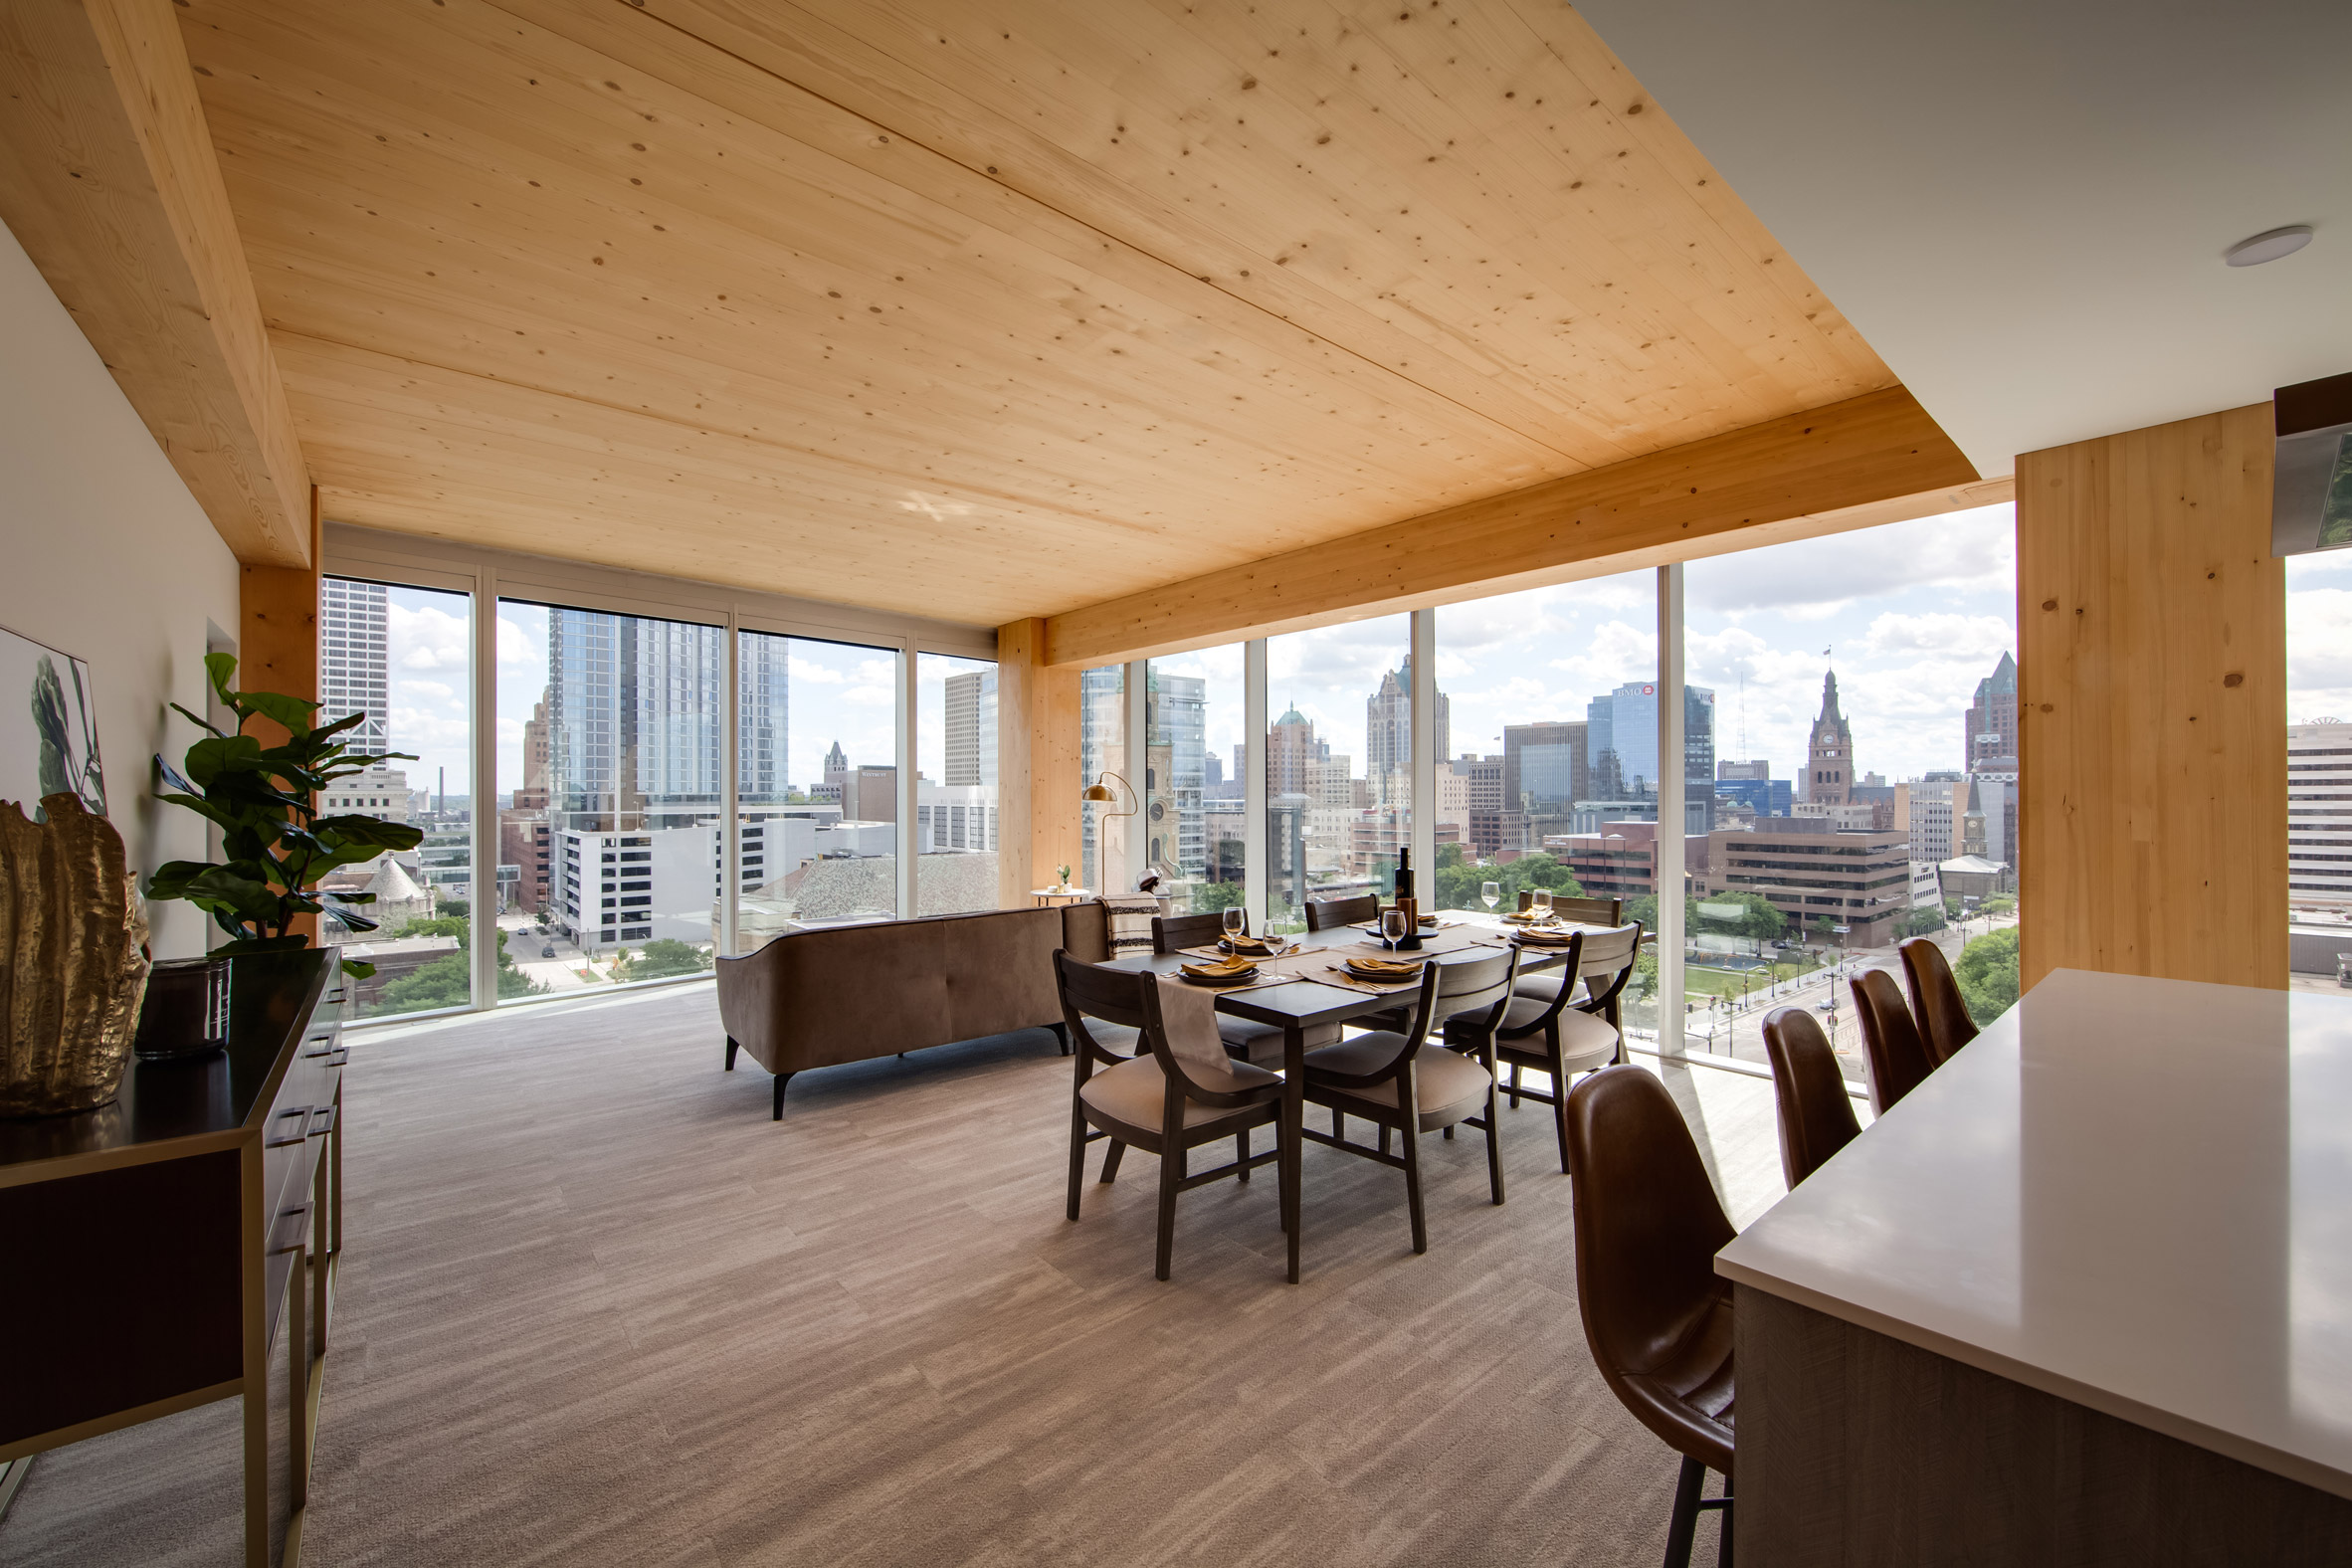 Interior of Ascent tower apartment with timber roof